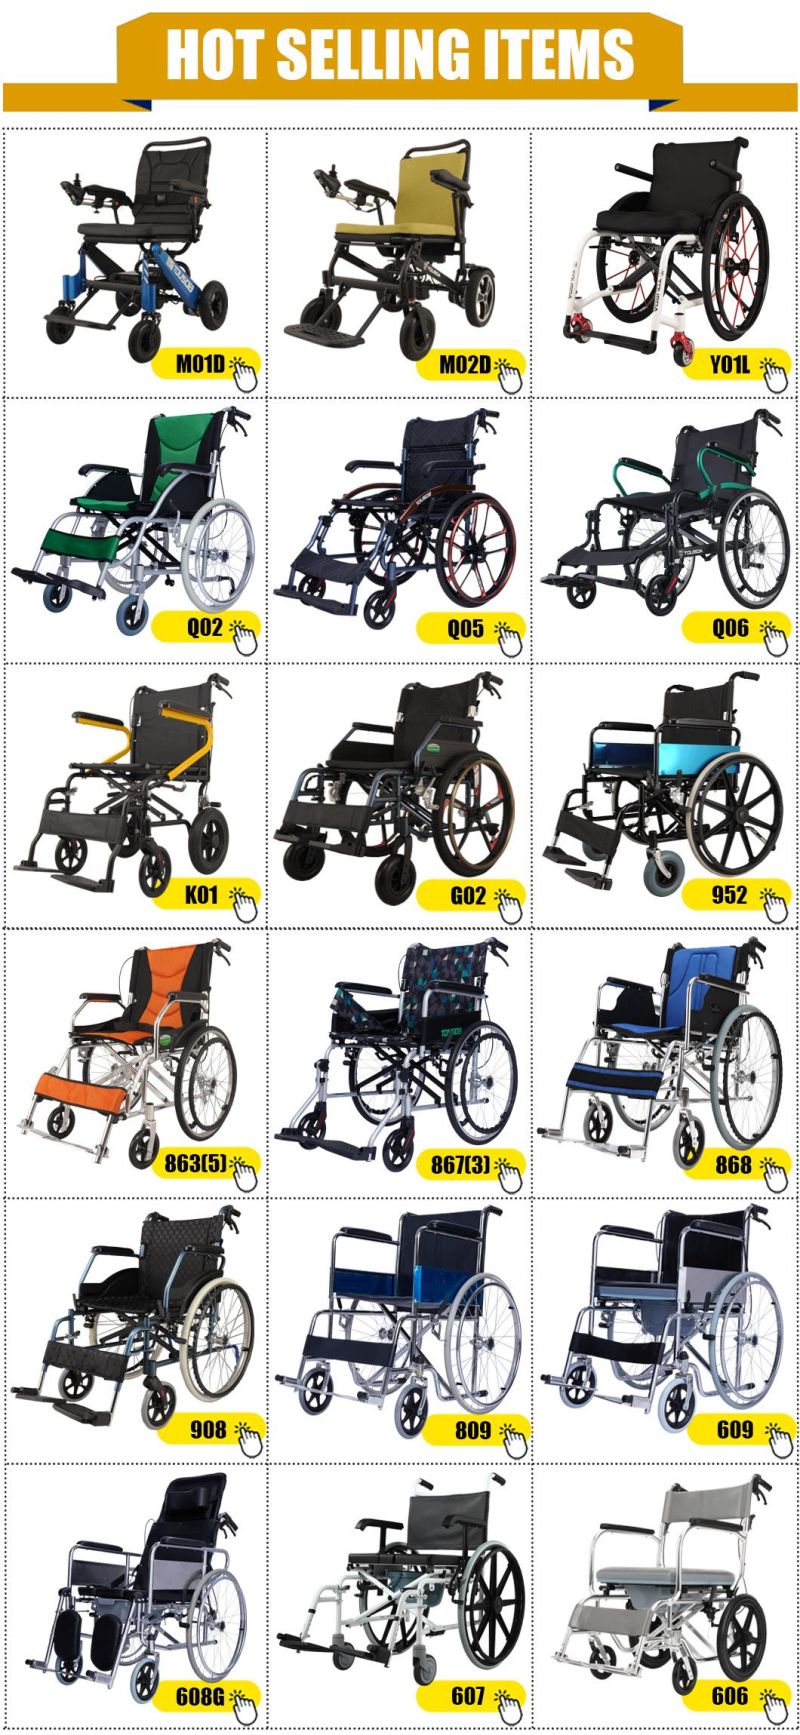 Folding and Portable Super Aluminum Alloy Sports and Leisure Manual Wheelchair